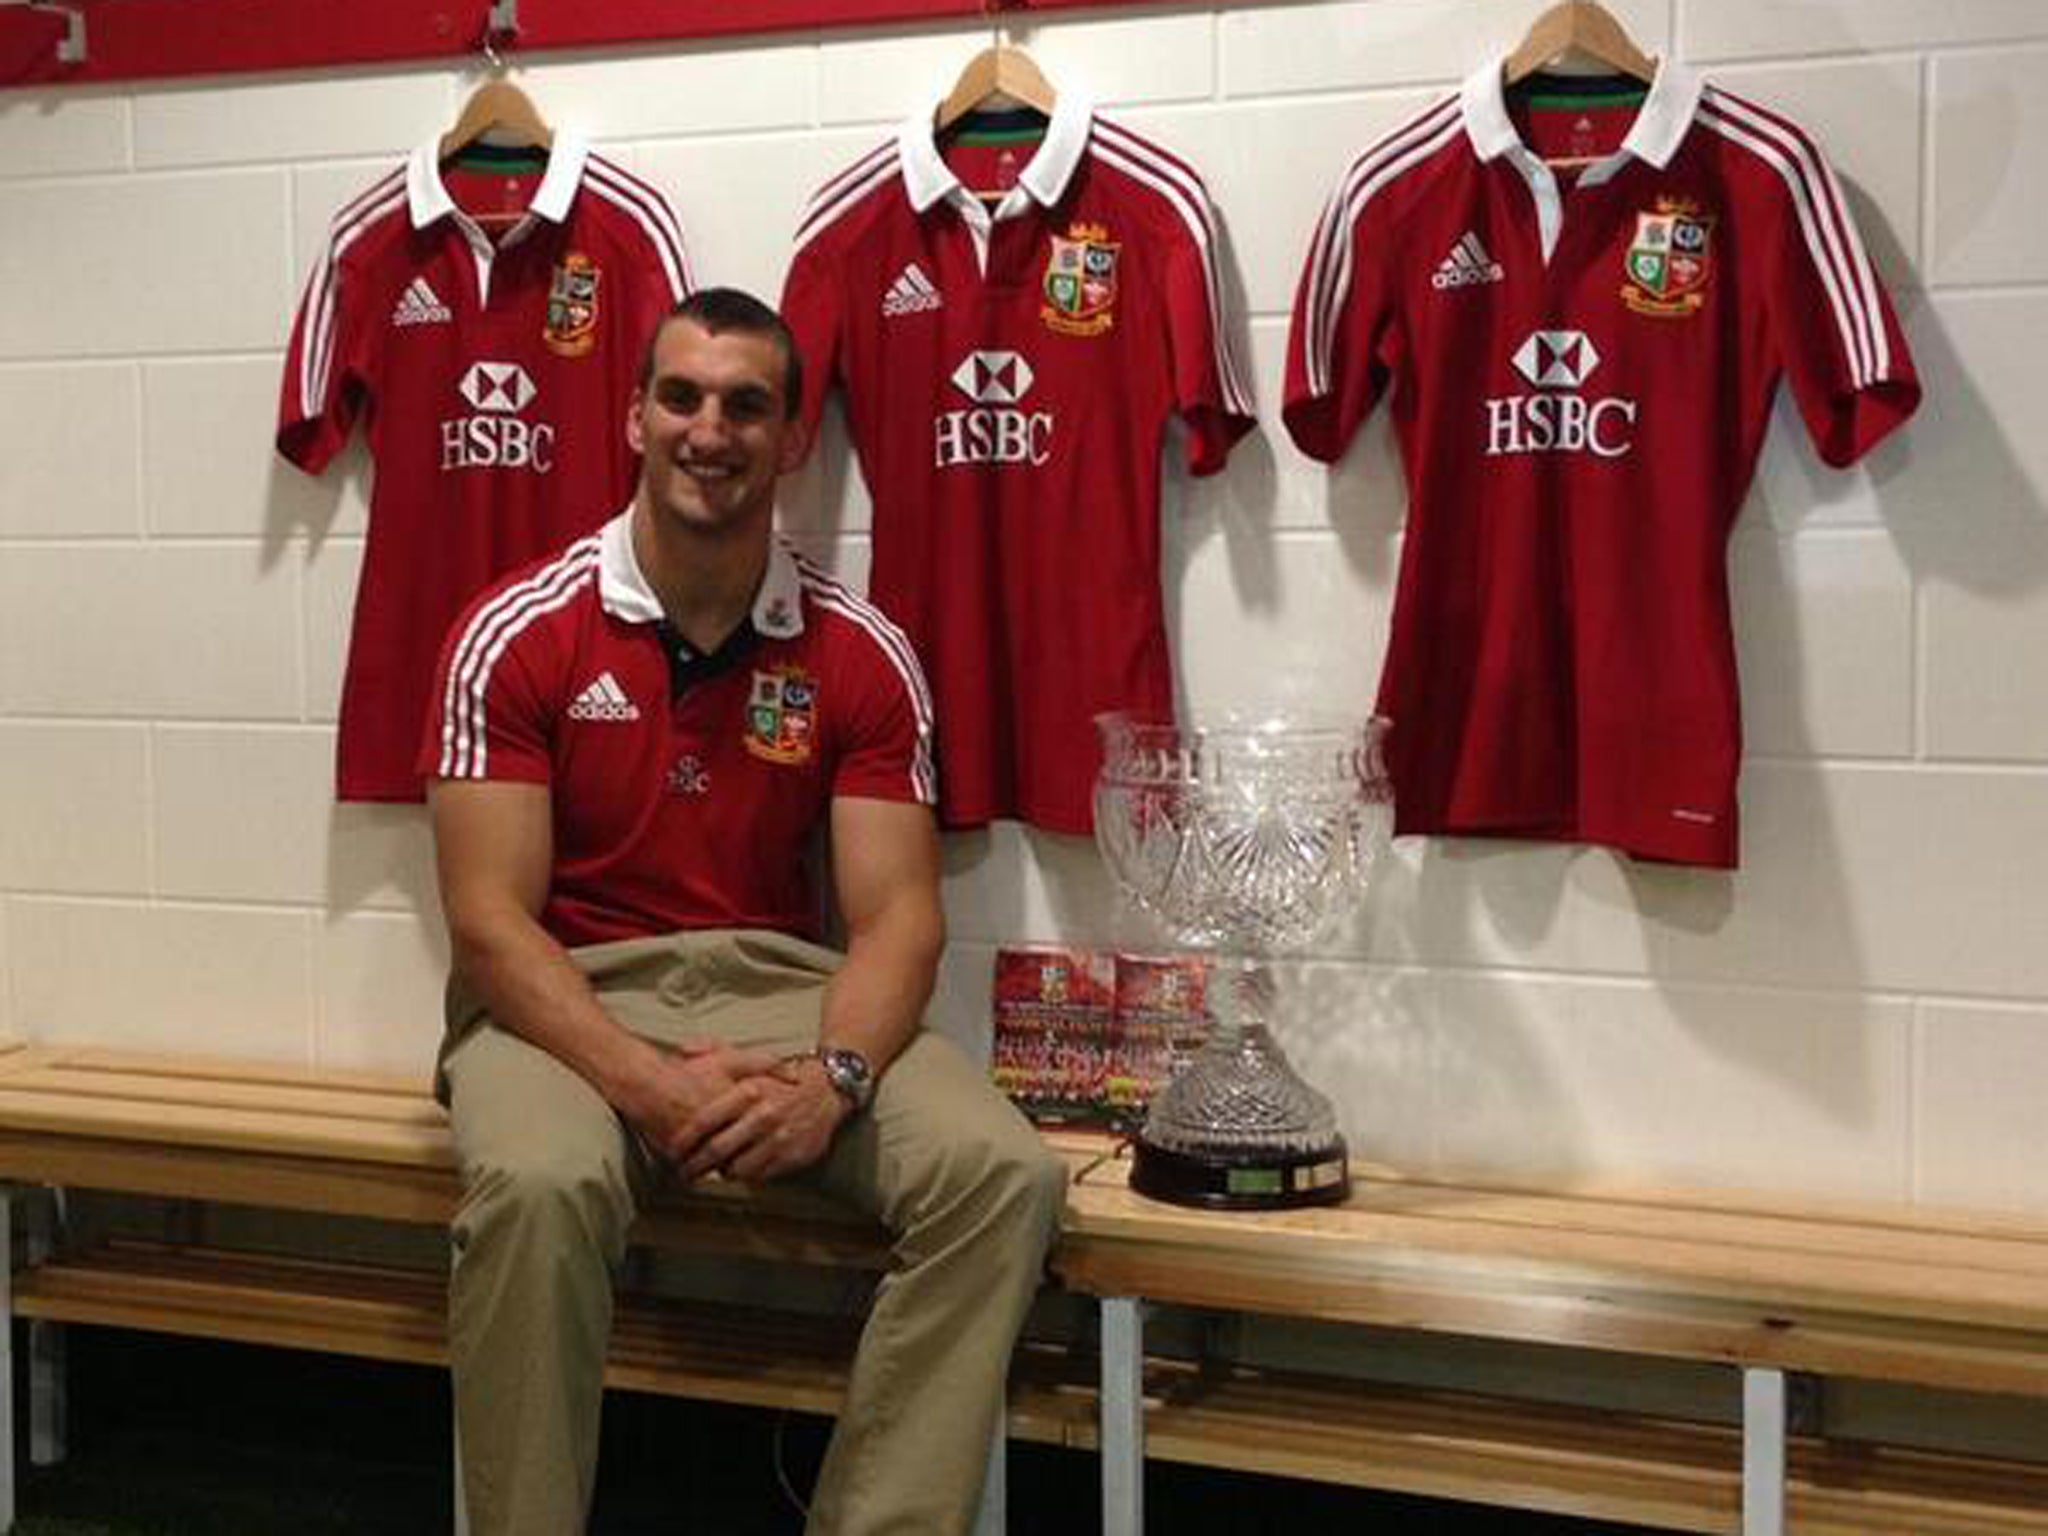 Sam Warburton with the Tom Richards Cup at the launch of the official Tour DVD